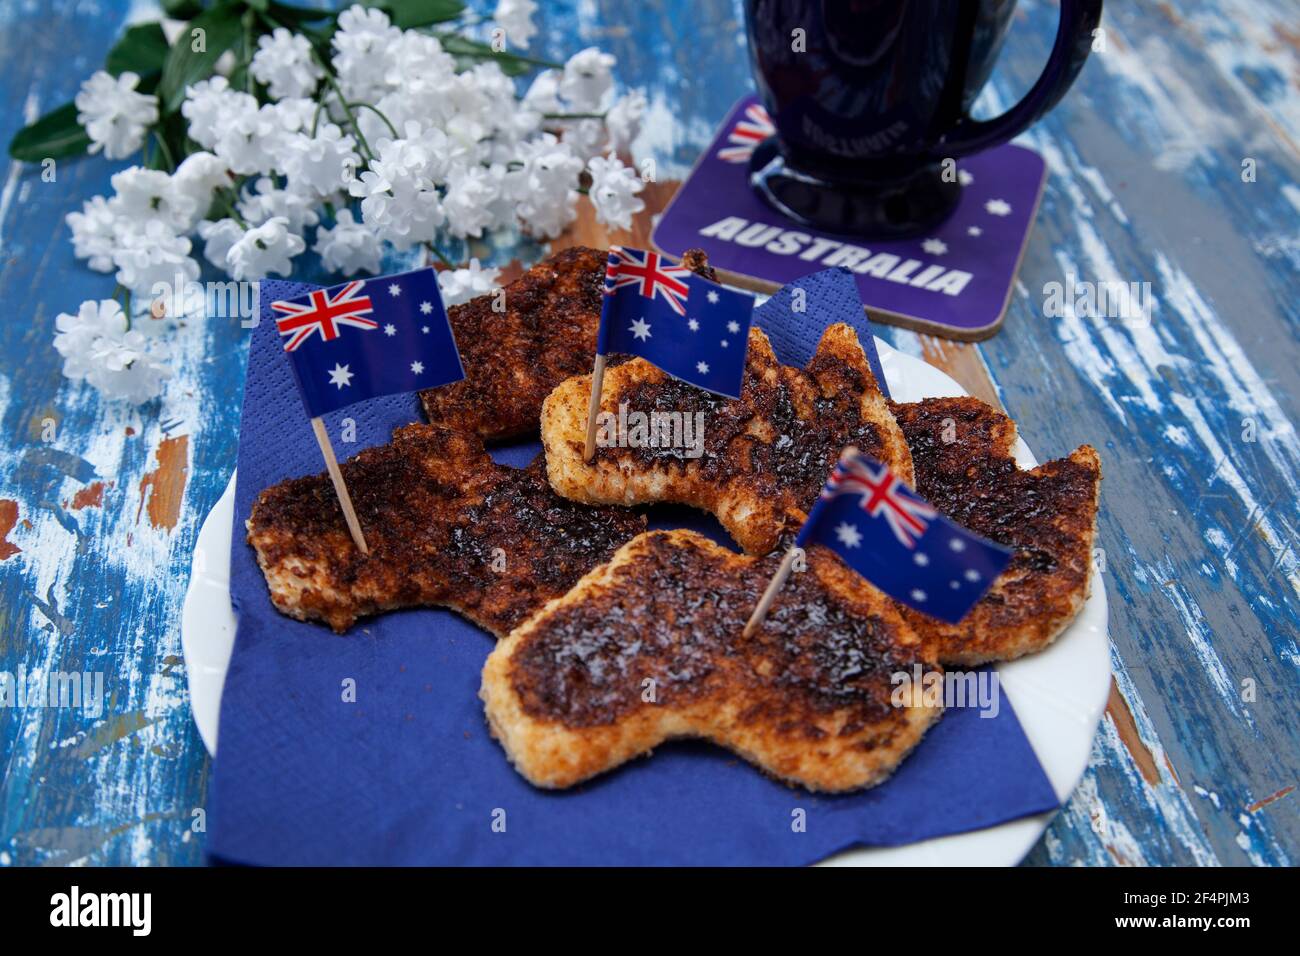 A plate of toast with vegemite, the iconic Australian savoury spread, cut into the shape of Australia as a special breakfast for Australia Day. Stock Photo